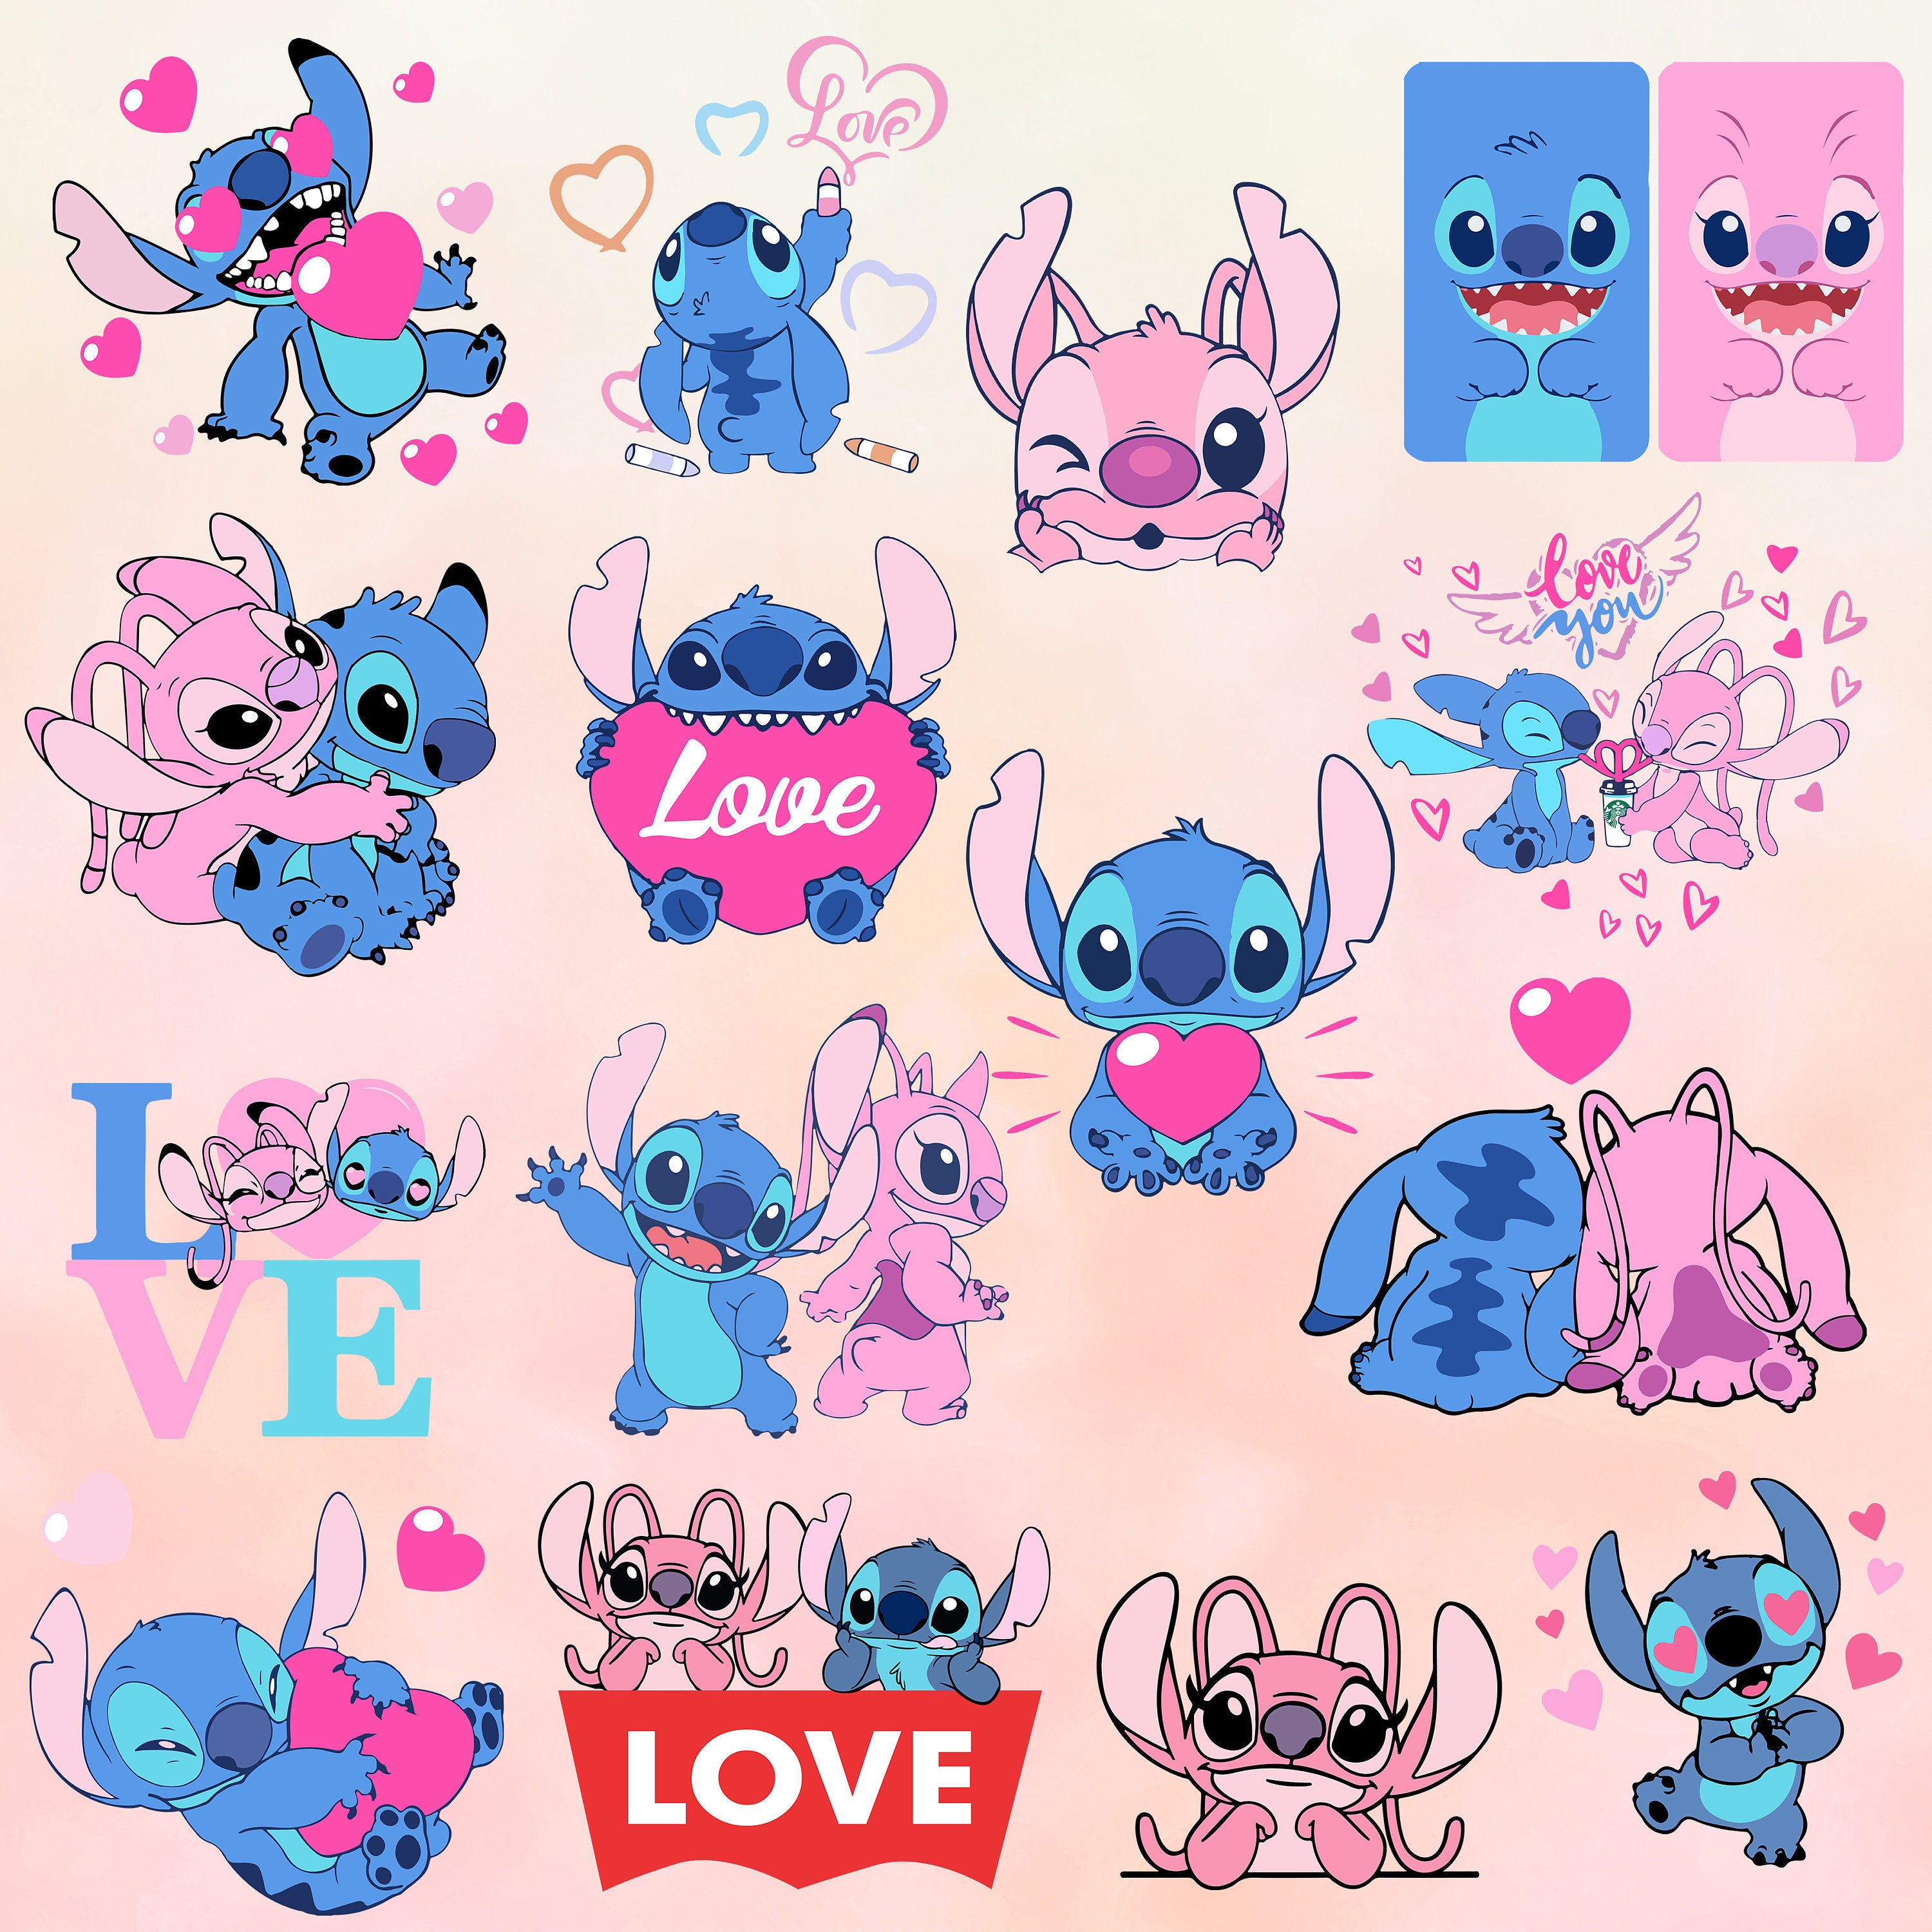 Stitch and Angel Valentines SVG PNG DXF Vector Clipart Layered Bundle ...